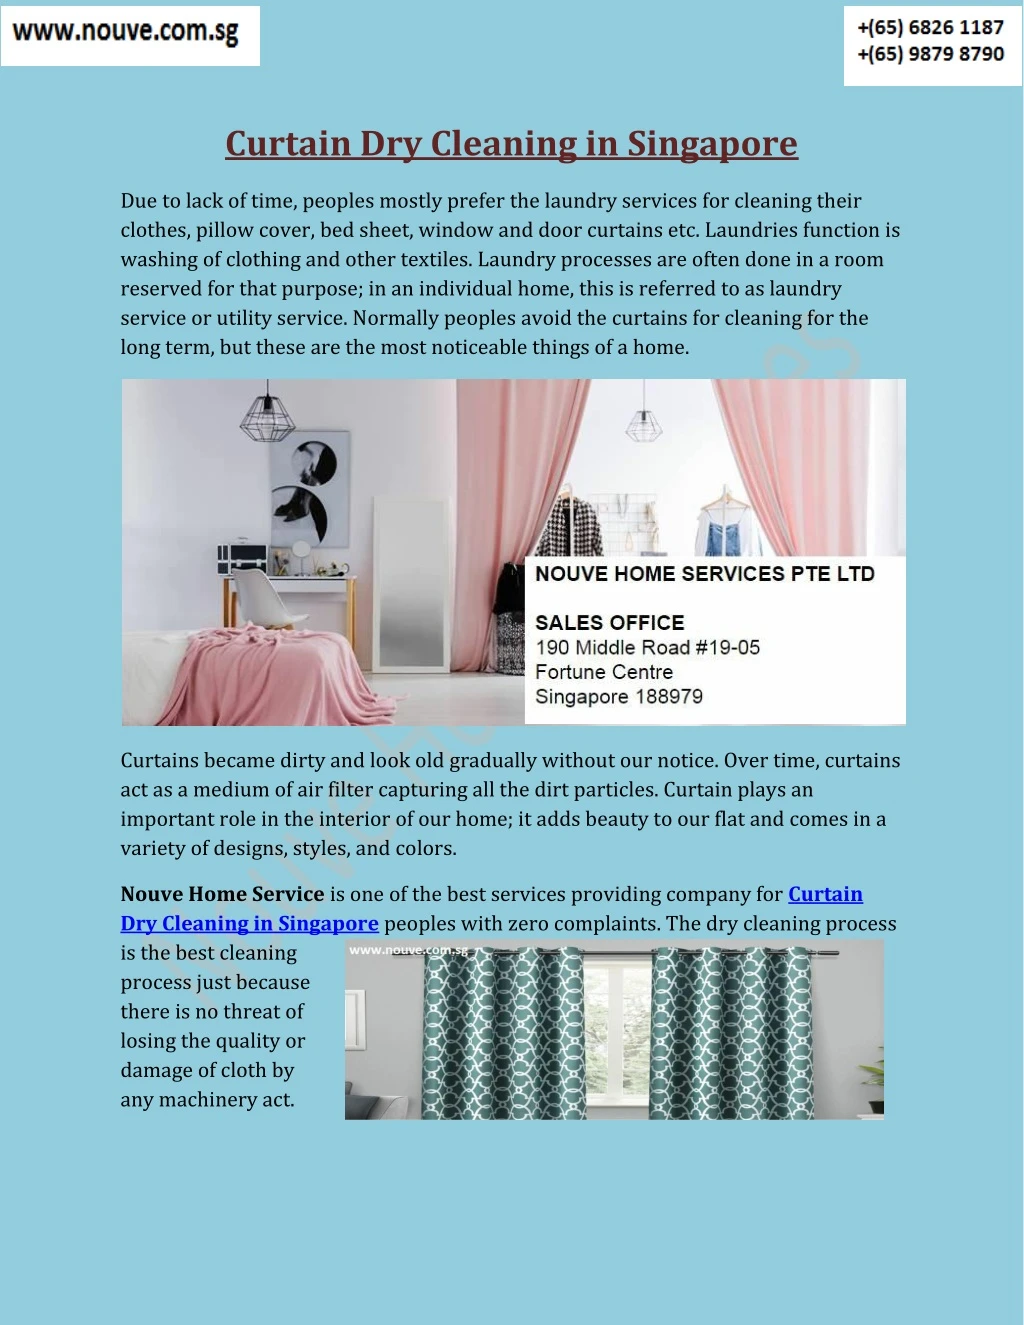 curtain dry cleaning in singapore